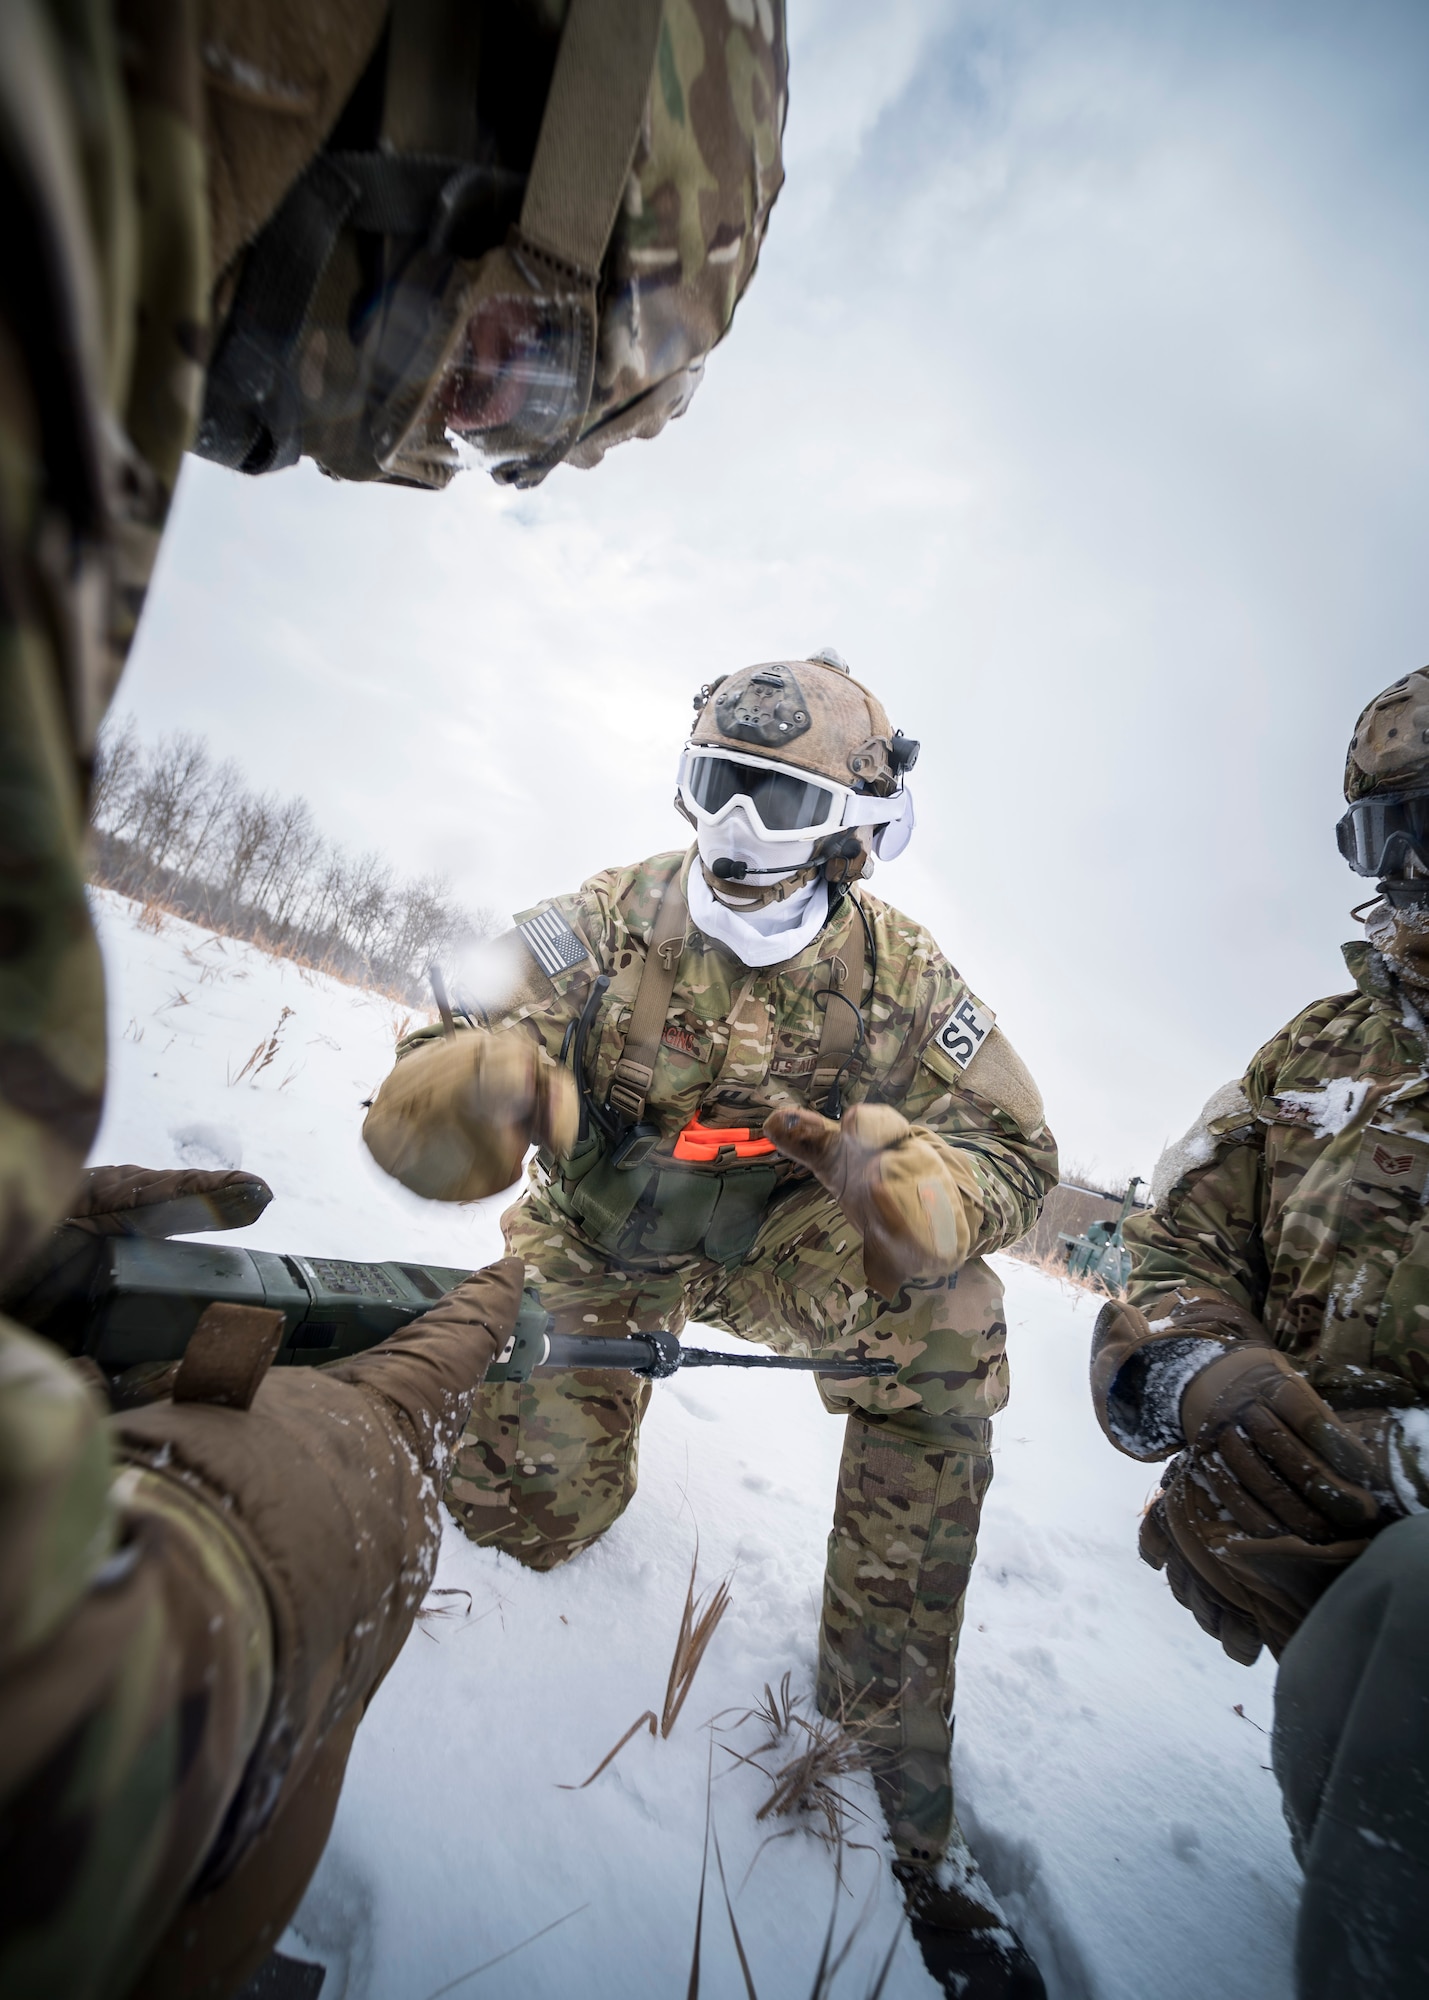 Defenders from the 91st Security Forces Group vector in a helicopter in the Turtle Mountain State Forest, N.D., Feb. 14, 2018, during a 91st Security Forces Group field training exercise. During the FTX, defenders vectored the aircraft to the landing zone and performed a simulated emergency medical evacuation. (U.S. Air Force photo by Senior Airman J.T. Armstrong)